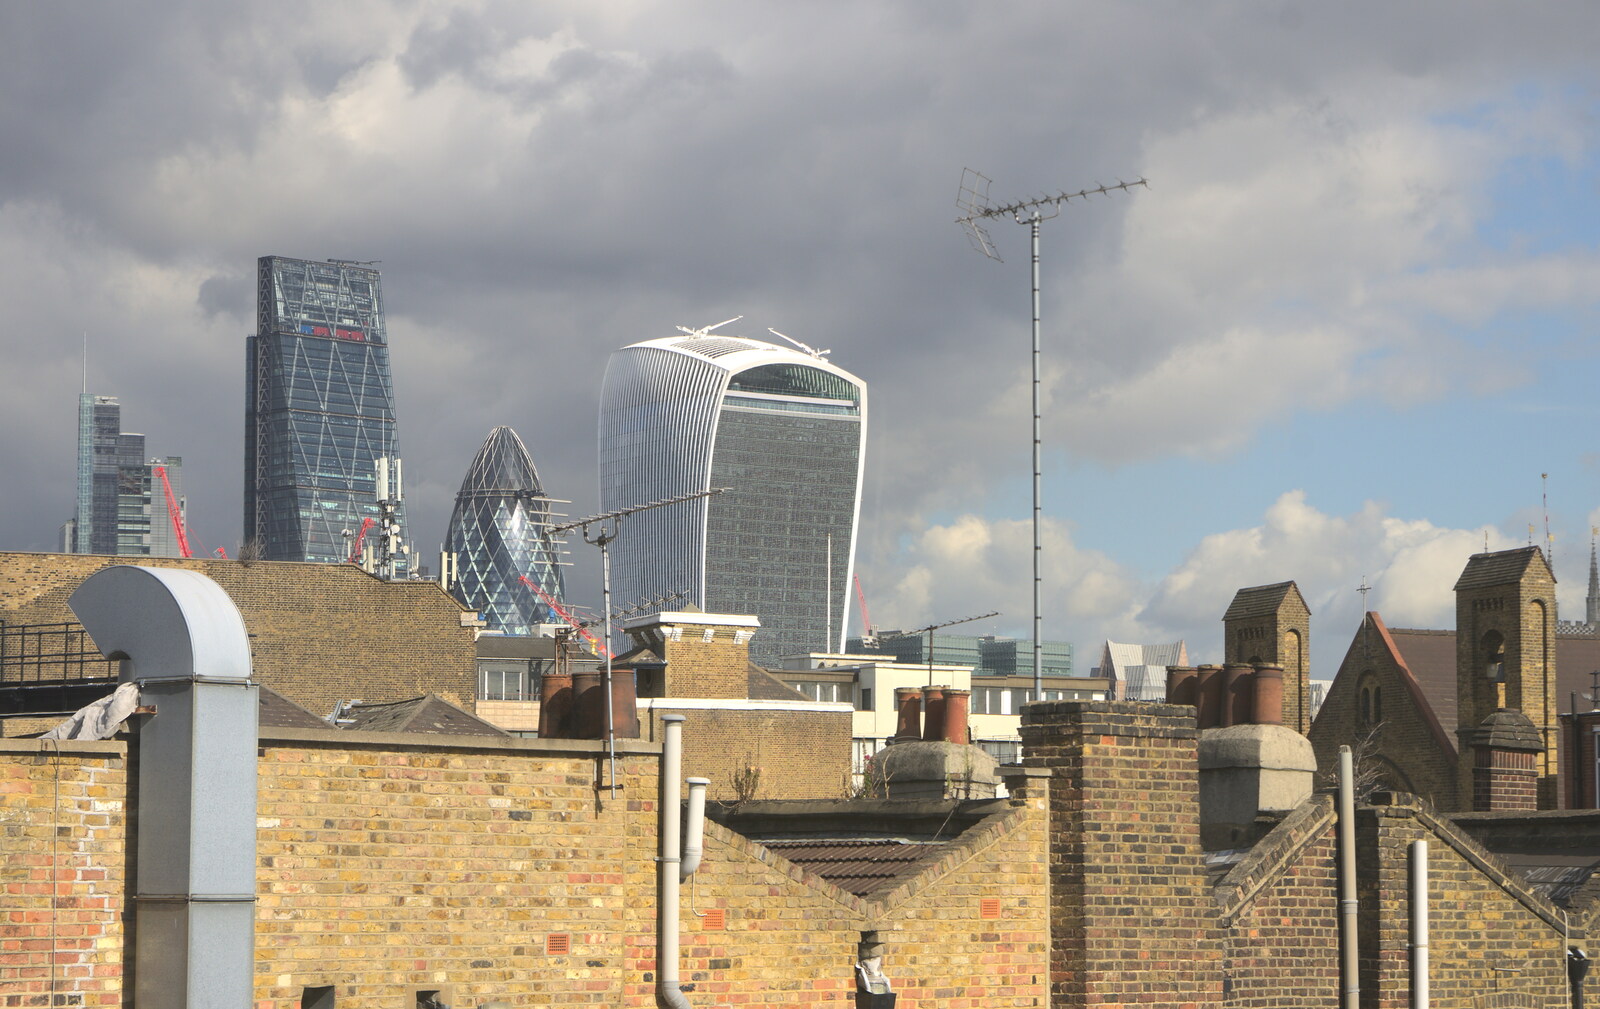 A view of the Walkie Talkie in The City from SwiftKey Innovation Week, Southwark Bridge Road, London - 7th October 2015